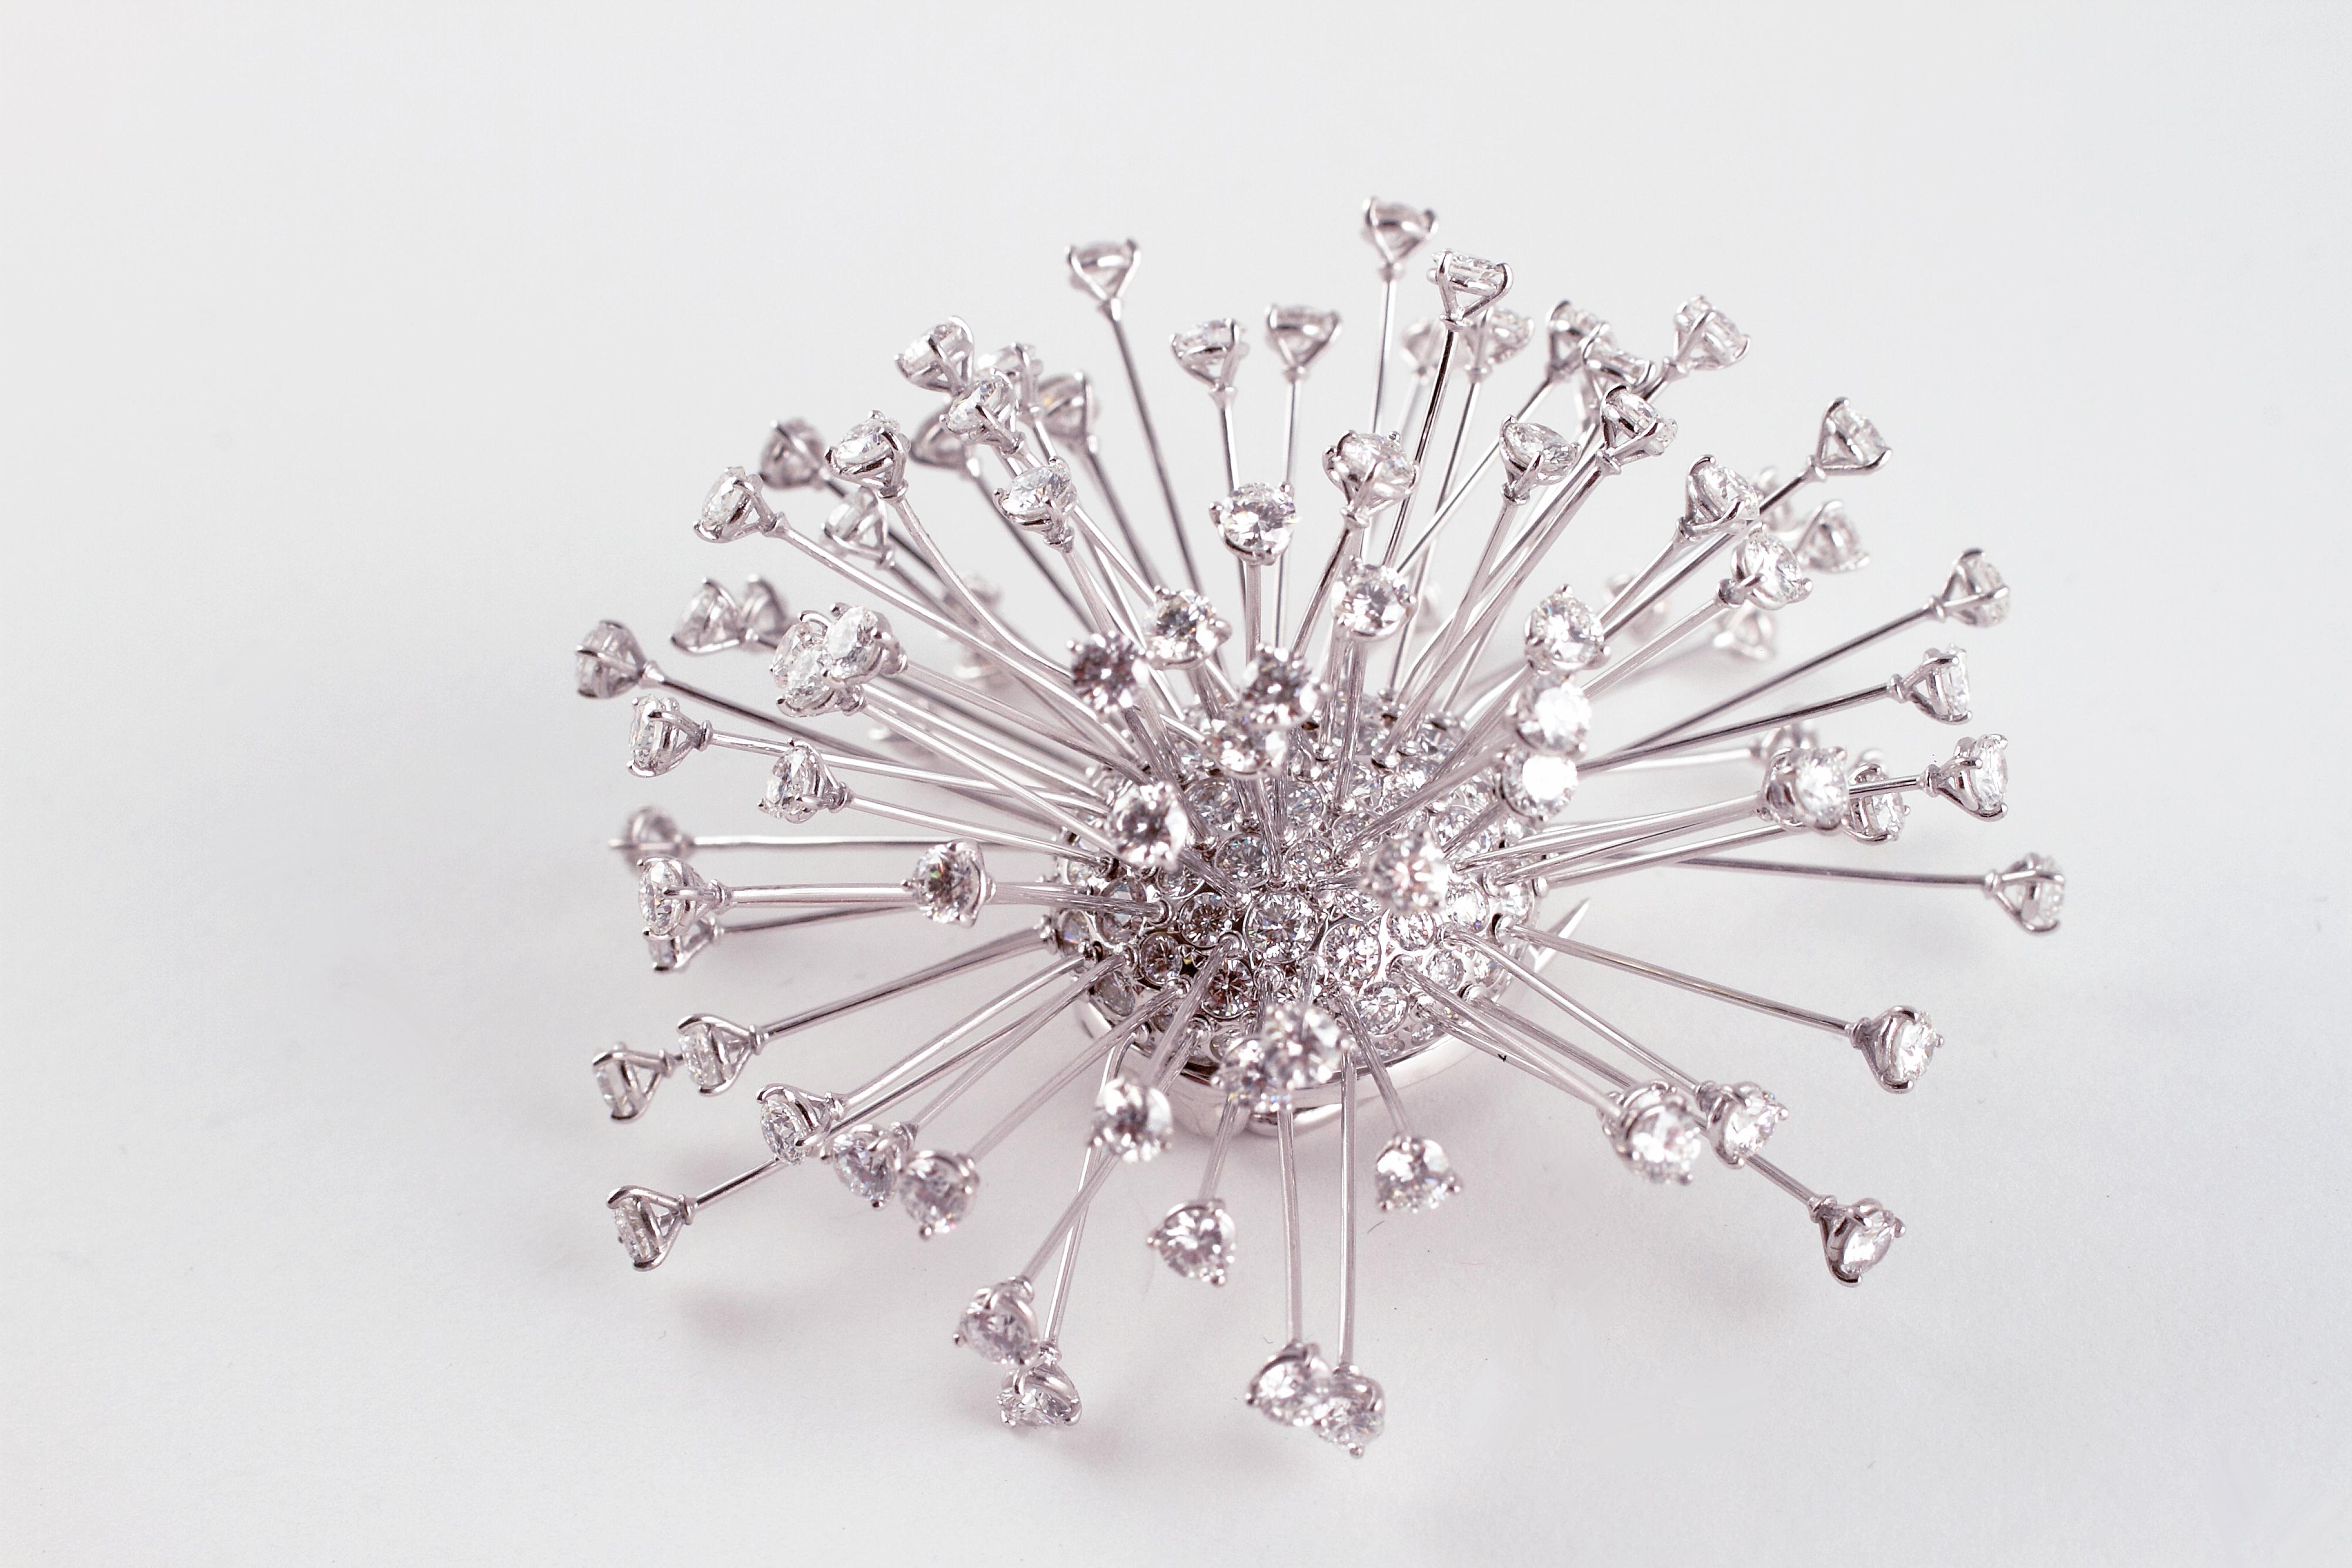 This elegant handcrafted brooch by famed London designer David Morris features 18 karat white gold en tremblant stalks that terminate in brilliant-cut diamonds, set into a center supporting additional diamonds.  The estimated total weight of all